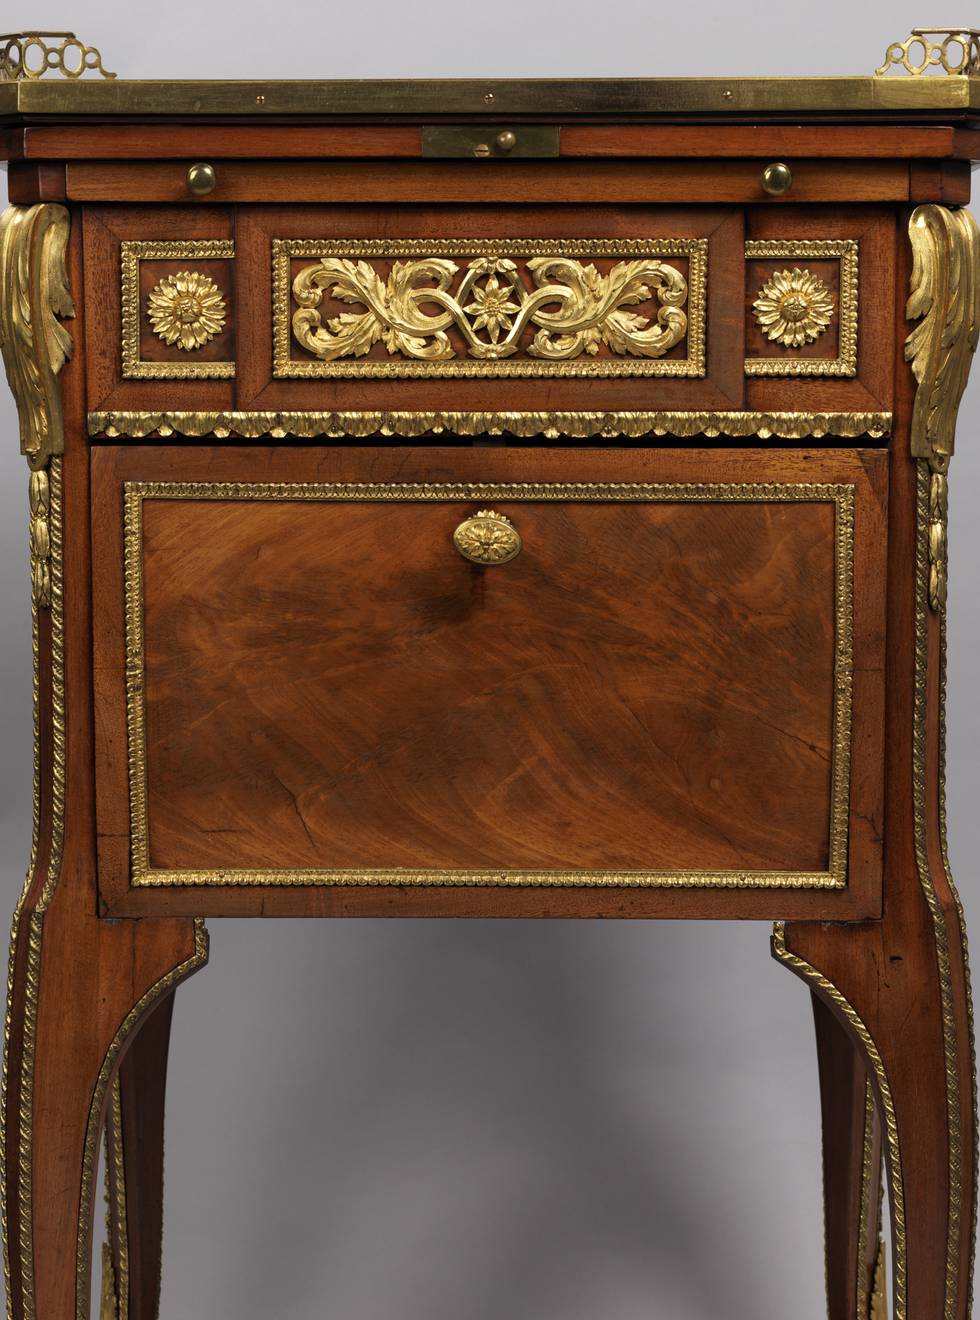 A detail of the front of a mahogany-veneered writing and toilet table